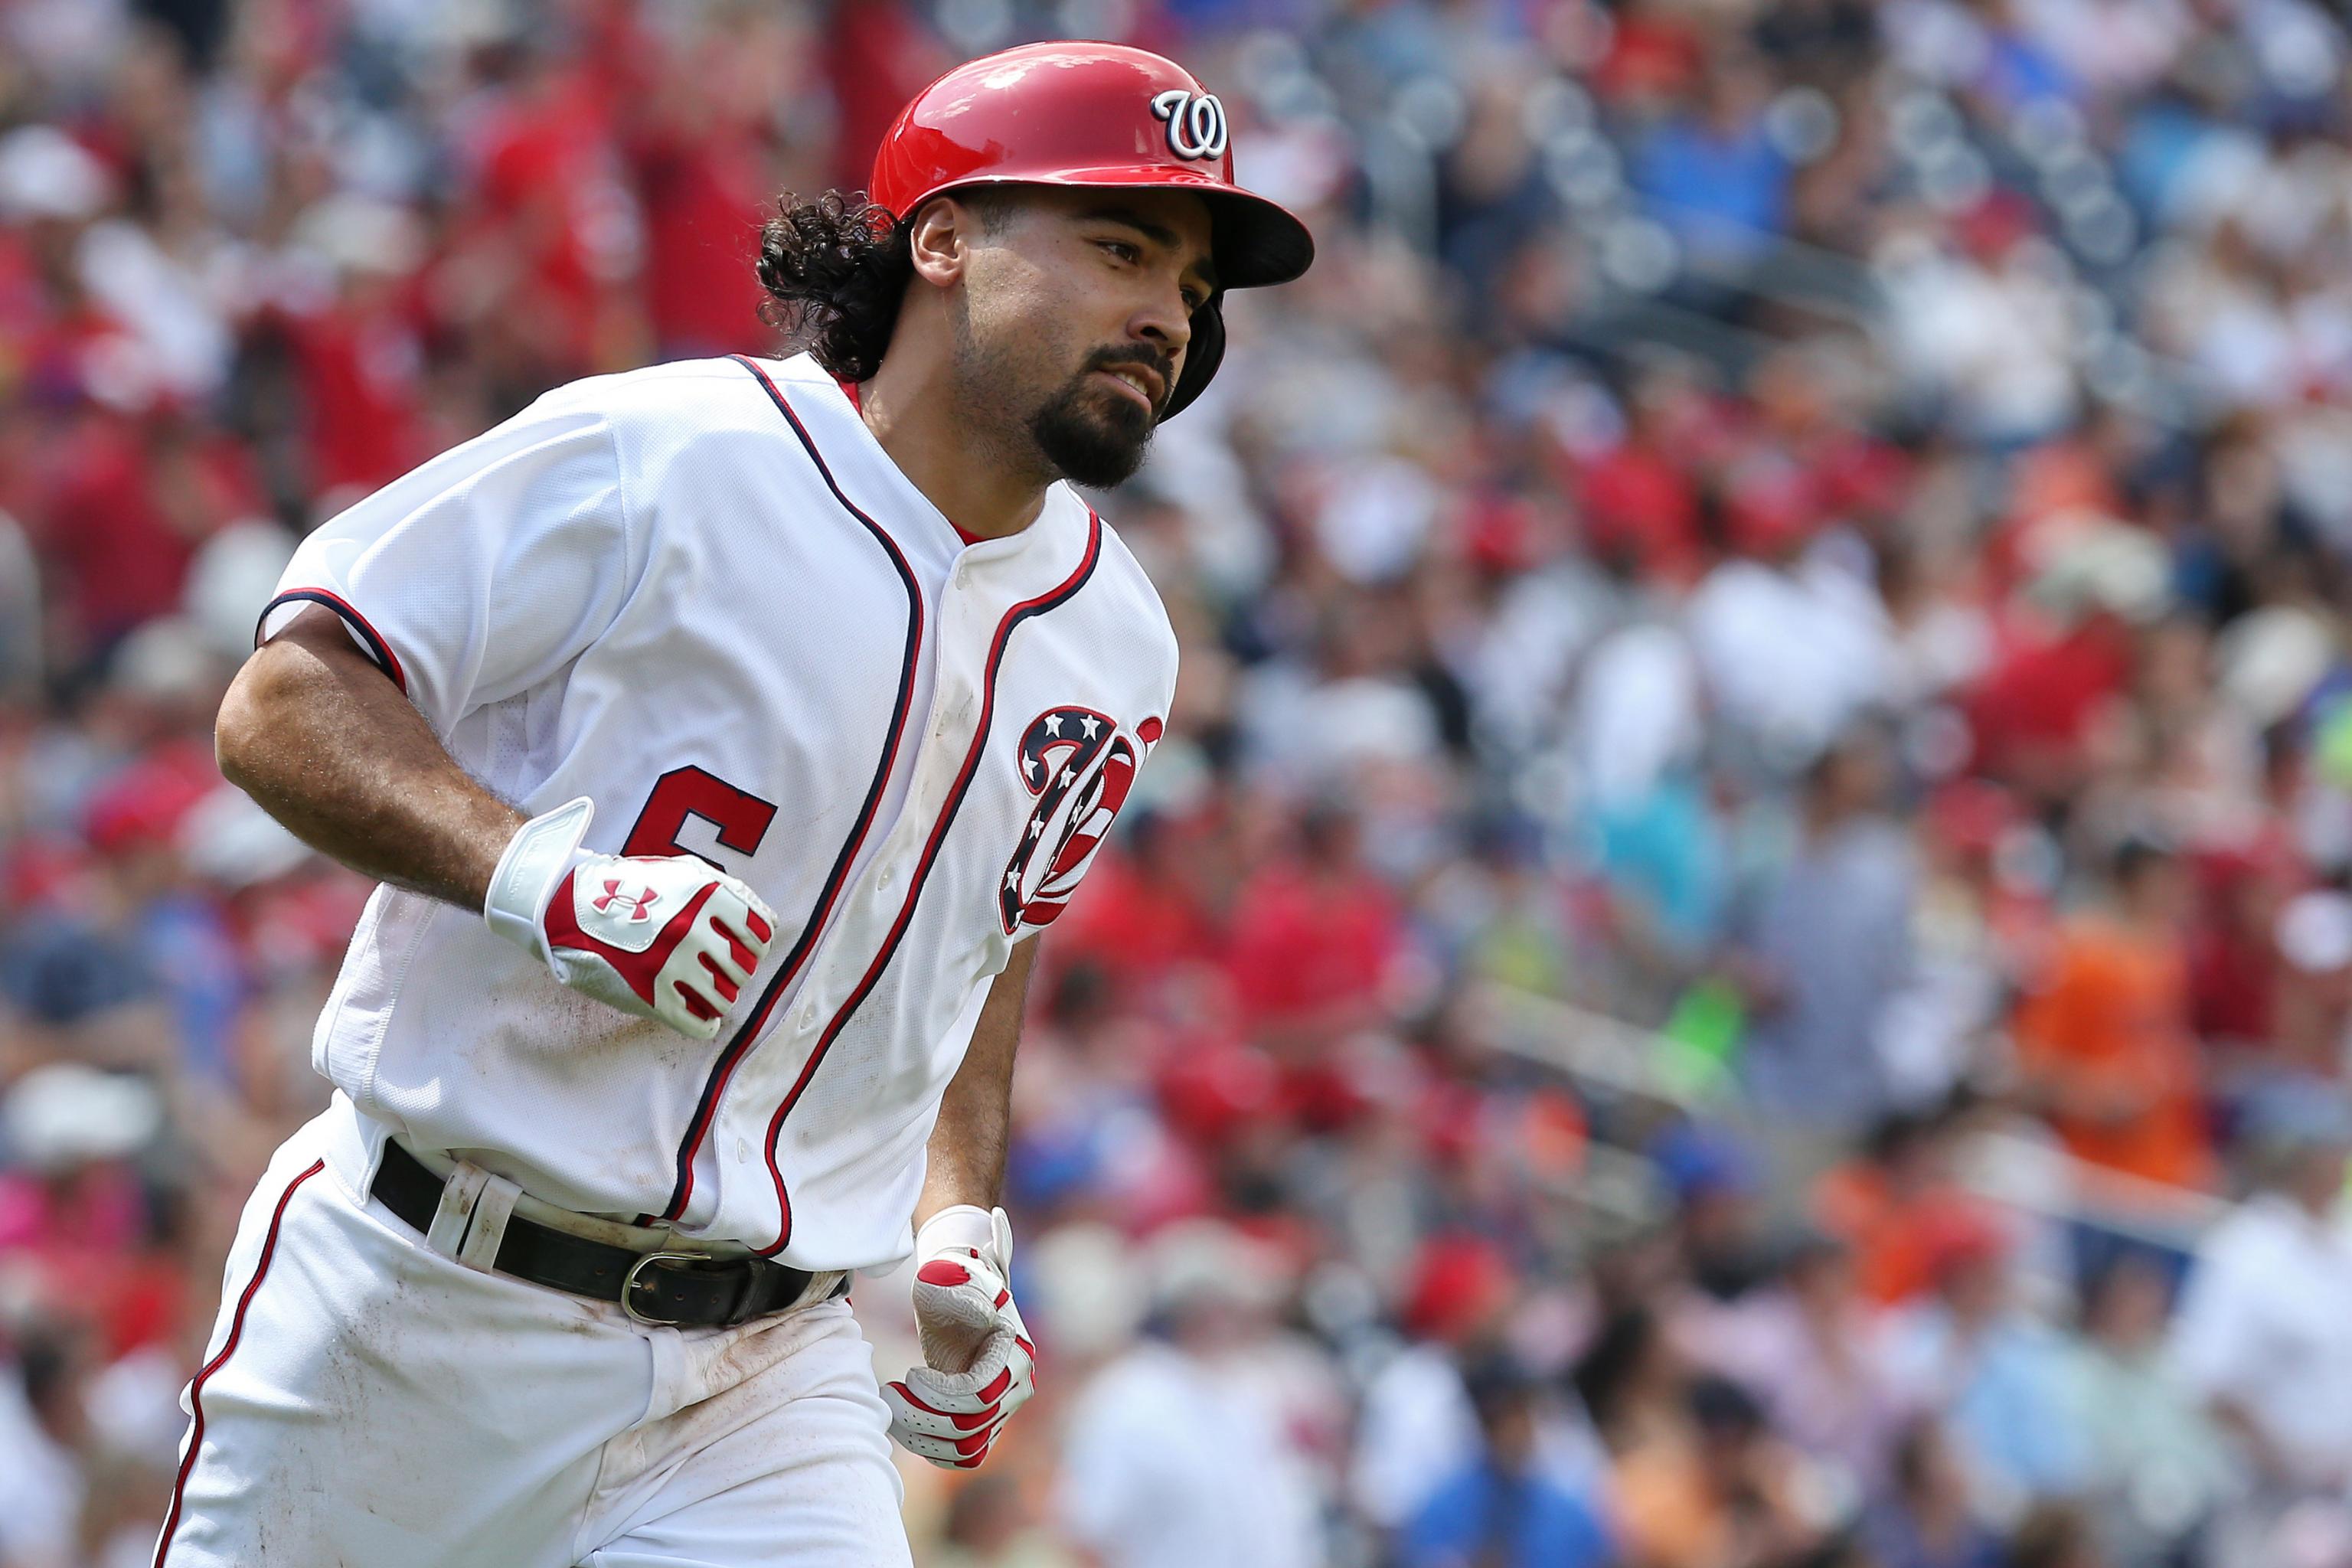 Rendon has 4 hits as Nationals rout Rays 11-2